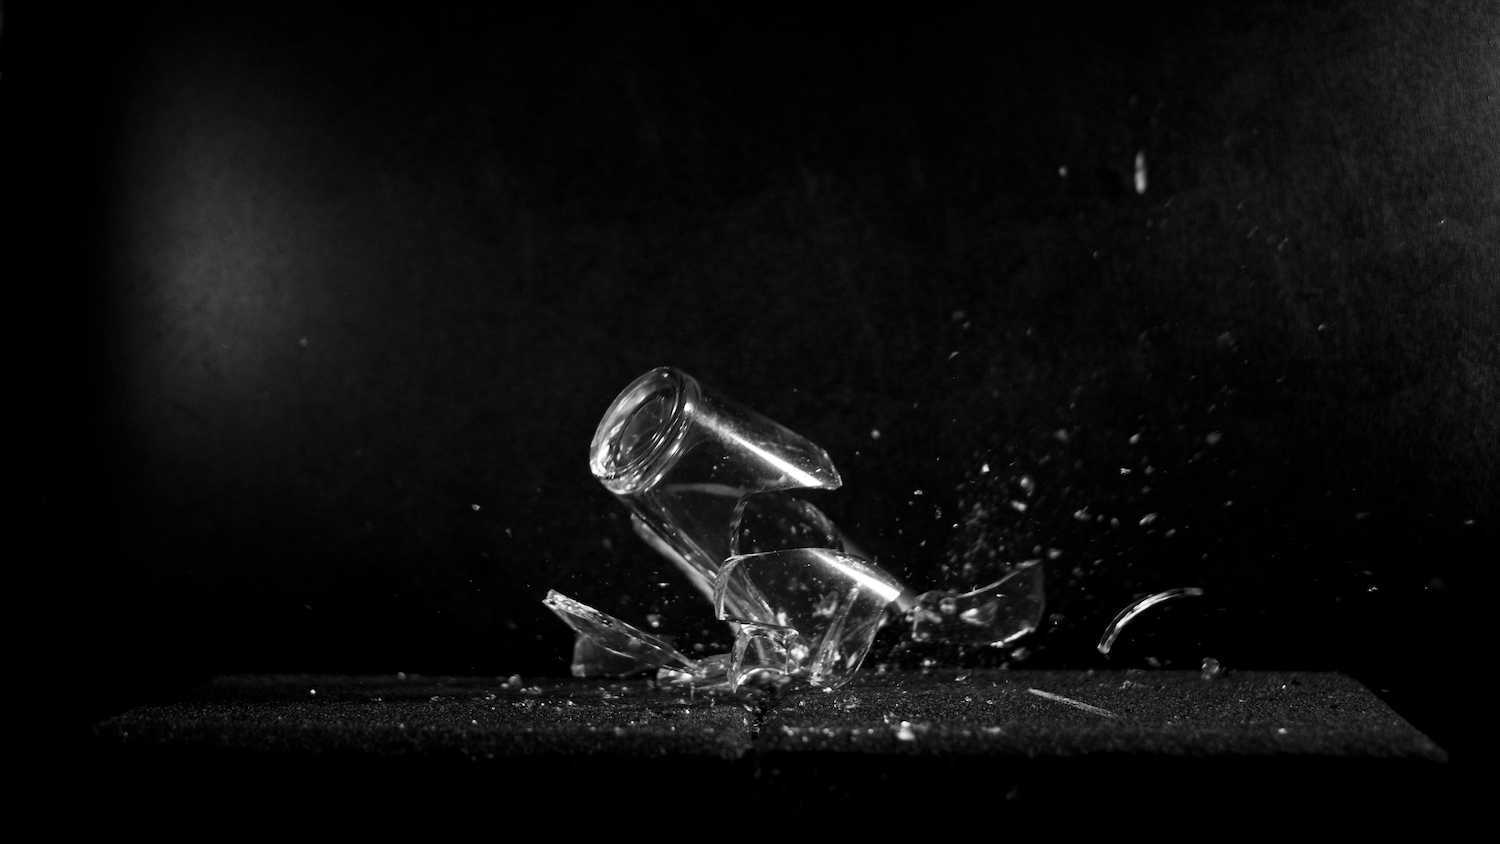 An image of glass breaking.